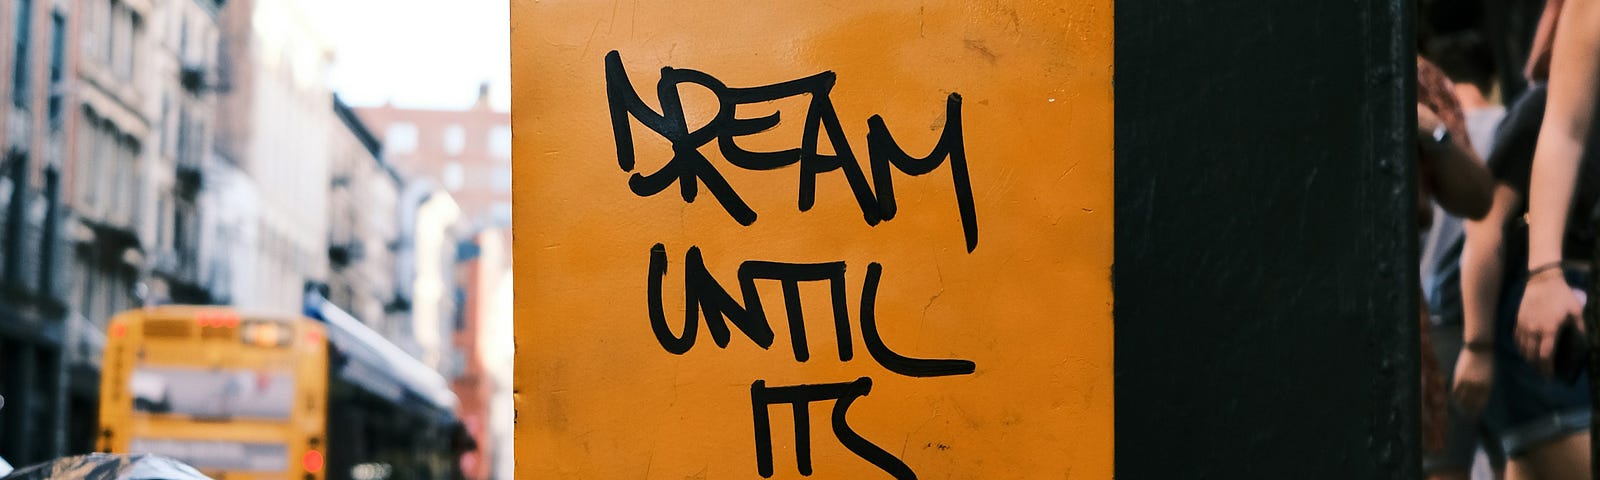 graffiti on a yellow newspaper stand in the city (DREAM UNTIL ITS YOUR OWN REALITY)